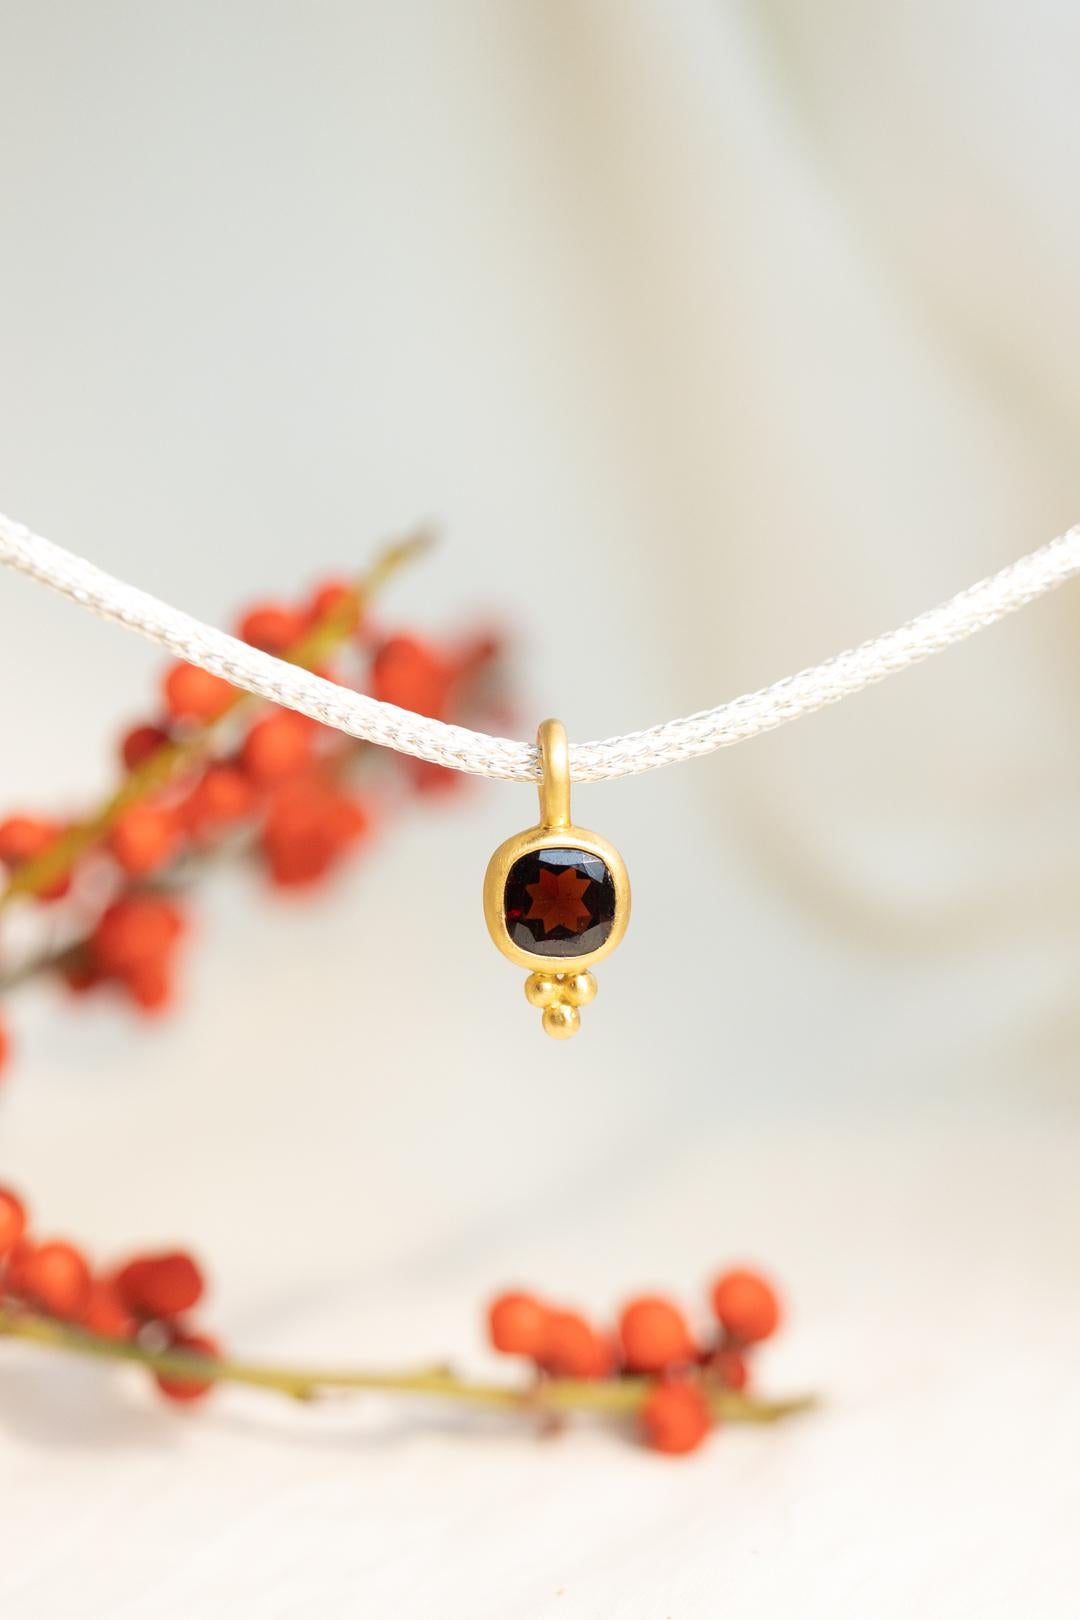 With the Garnet collection, it was our goal to create jewelery that fits perfectly into the Christmas season. It's a classic Monika Herré design with a bit of extra warmth and cuteness for the festive season.

The band of the ring, left in its pure